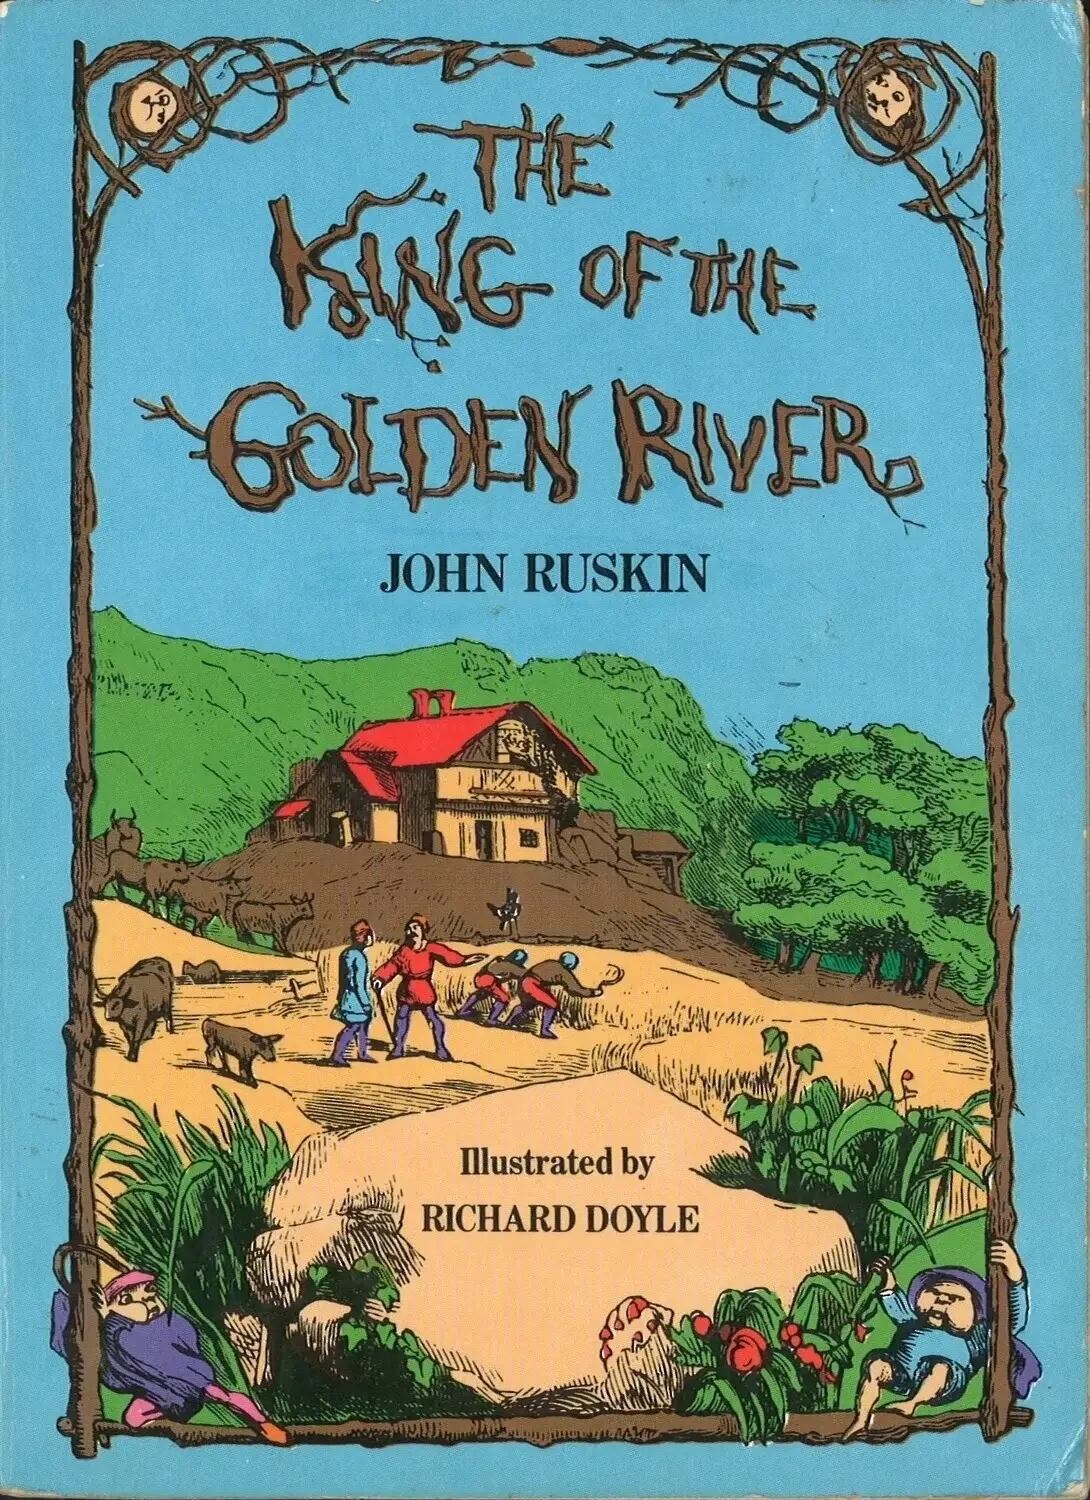 The King of The Golden River by John Ruskin